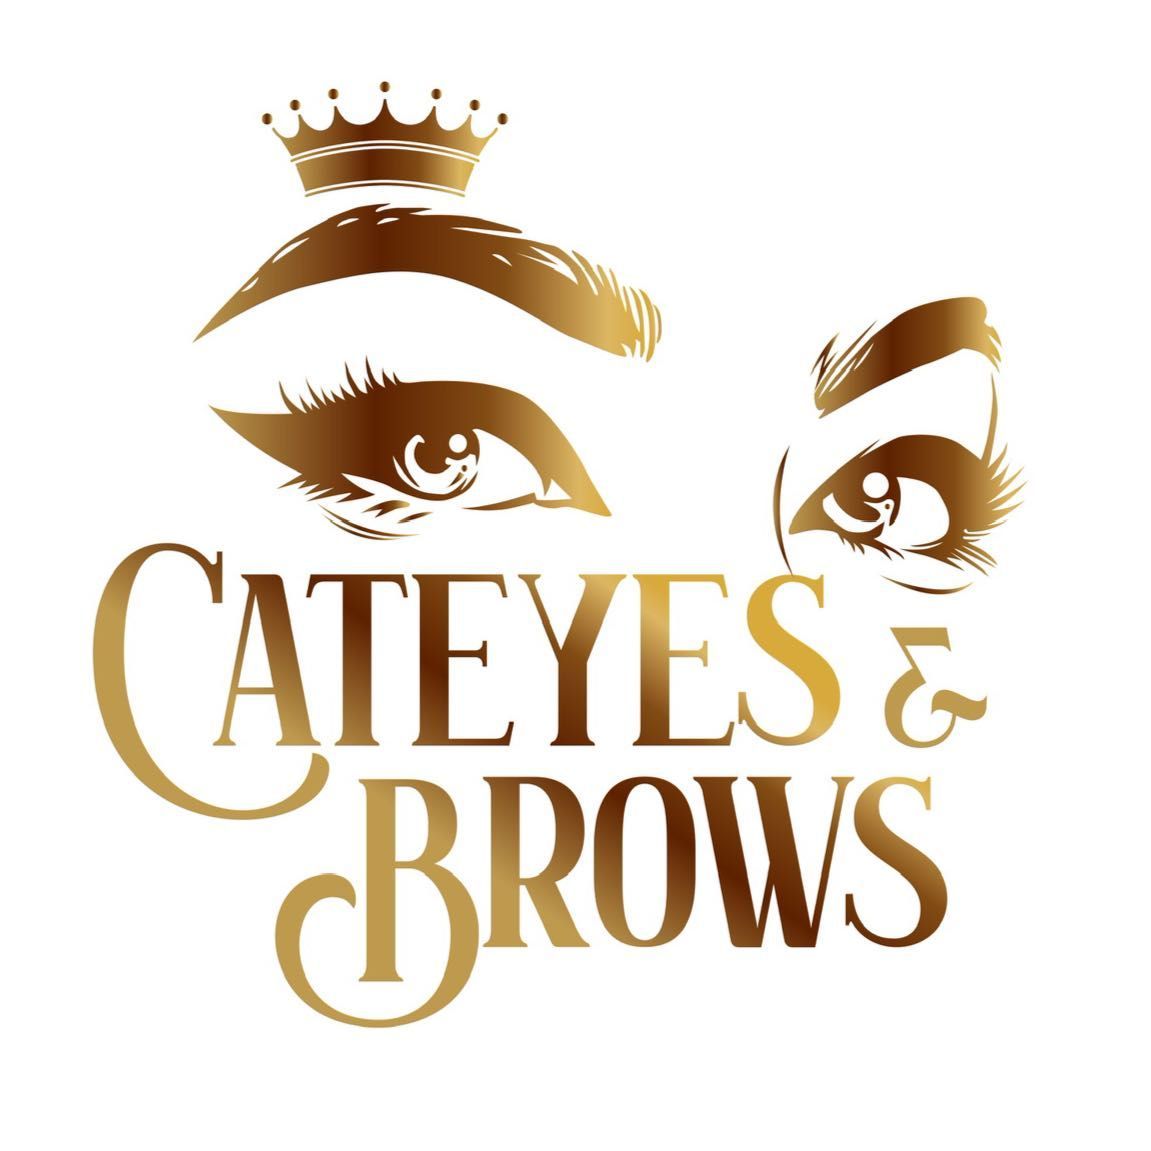 Cateyes And Brows LLC, 16640 Crescent Ave, Tinley Park, 60477